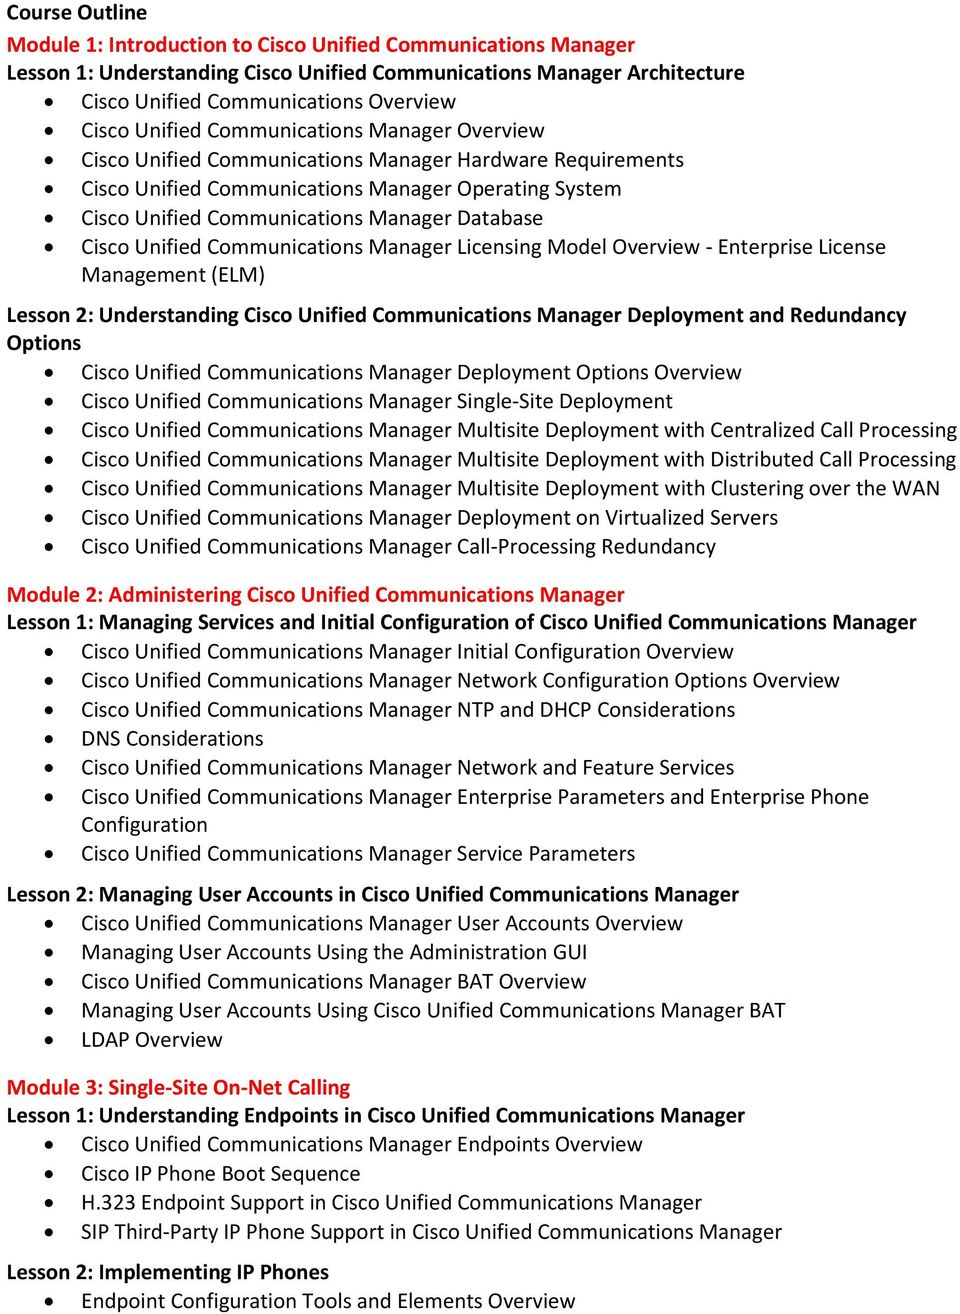 Cisco Unified Communications Manager Licensing Model Overview - Enterprise License Management (ELM) Lesson 2: Understanding Cisco Unified Communications Manager Deployment and Redundancy Options